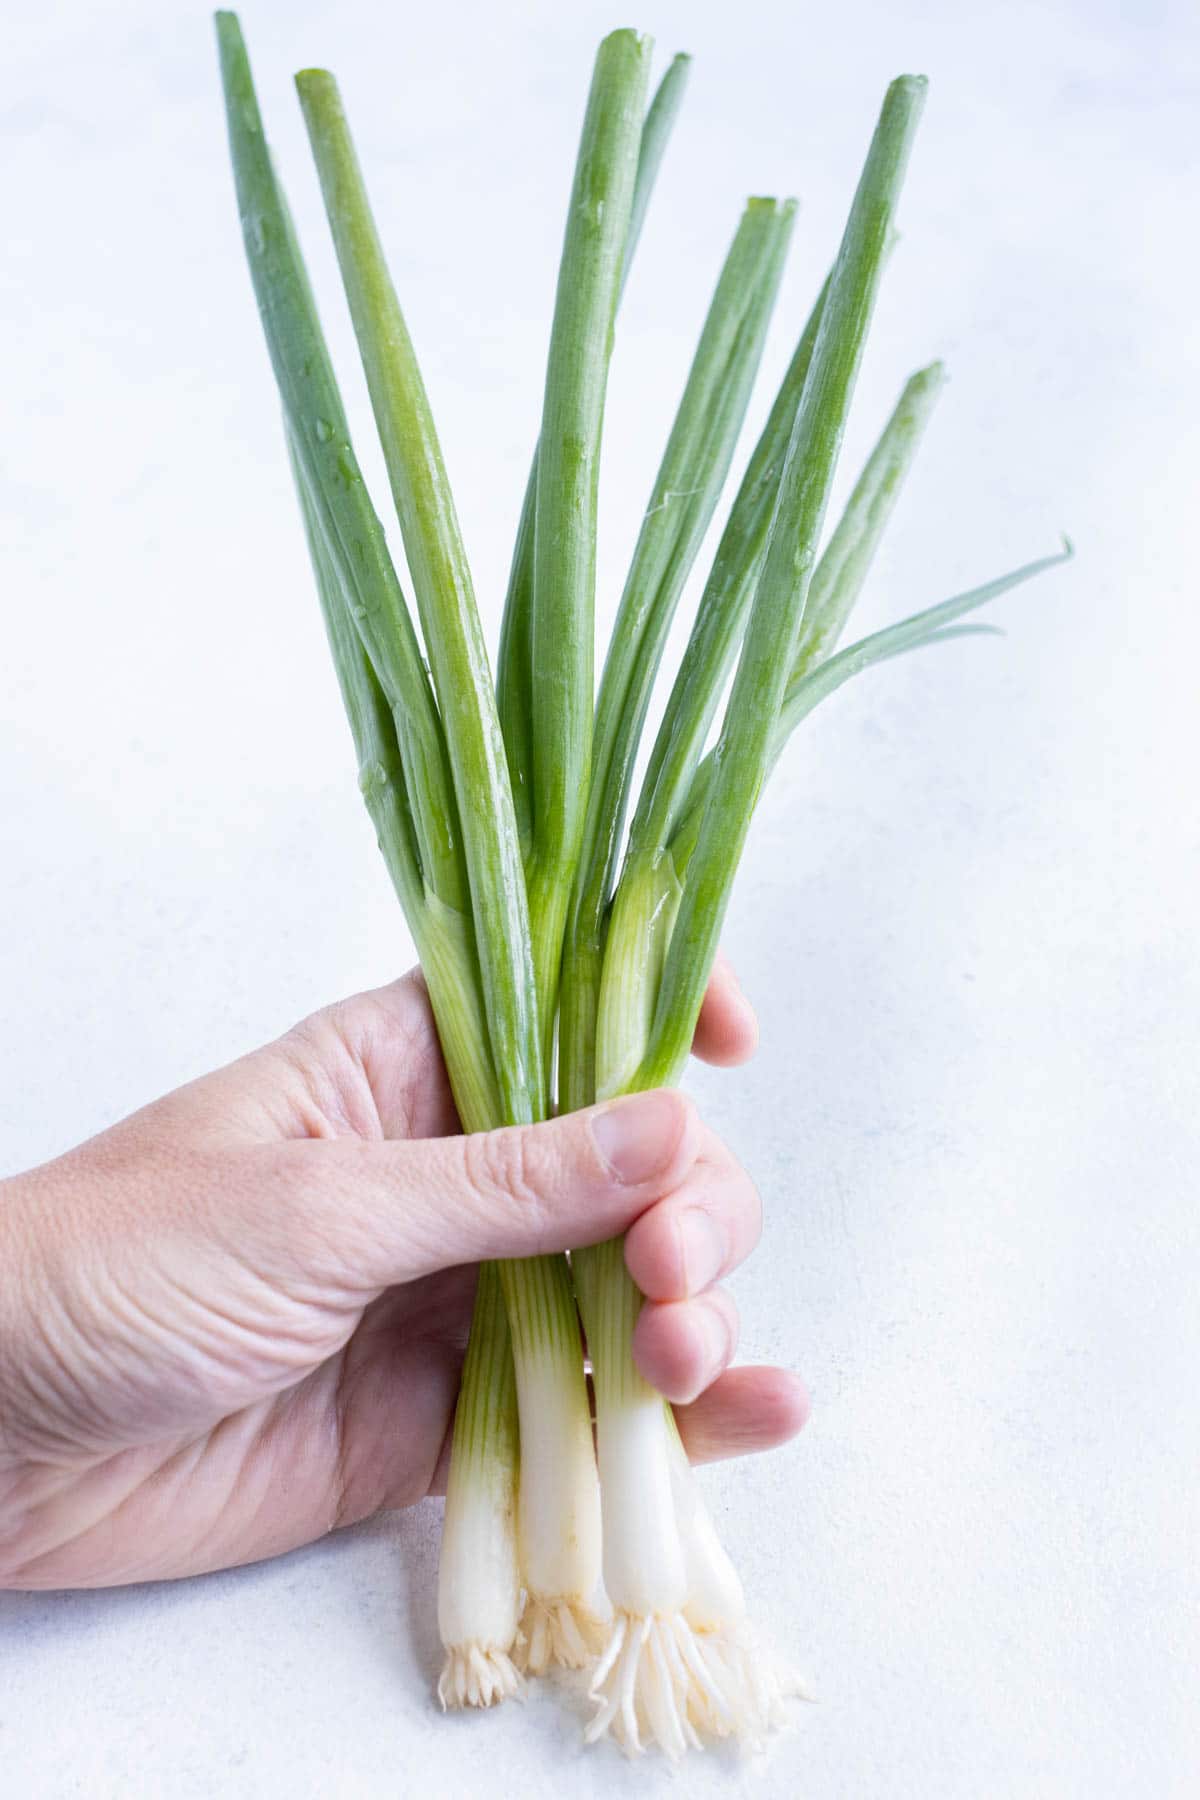 Green onions are held up by a hand.